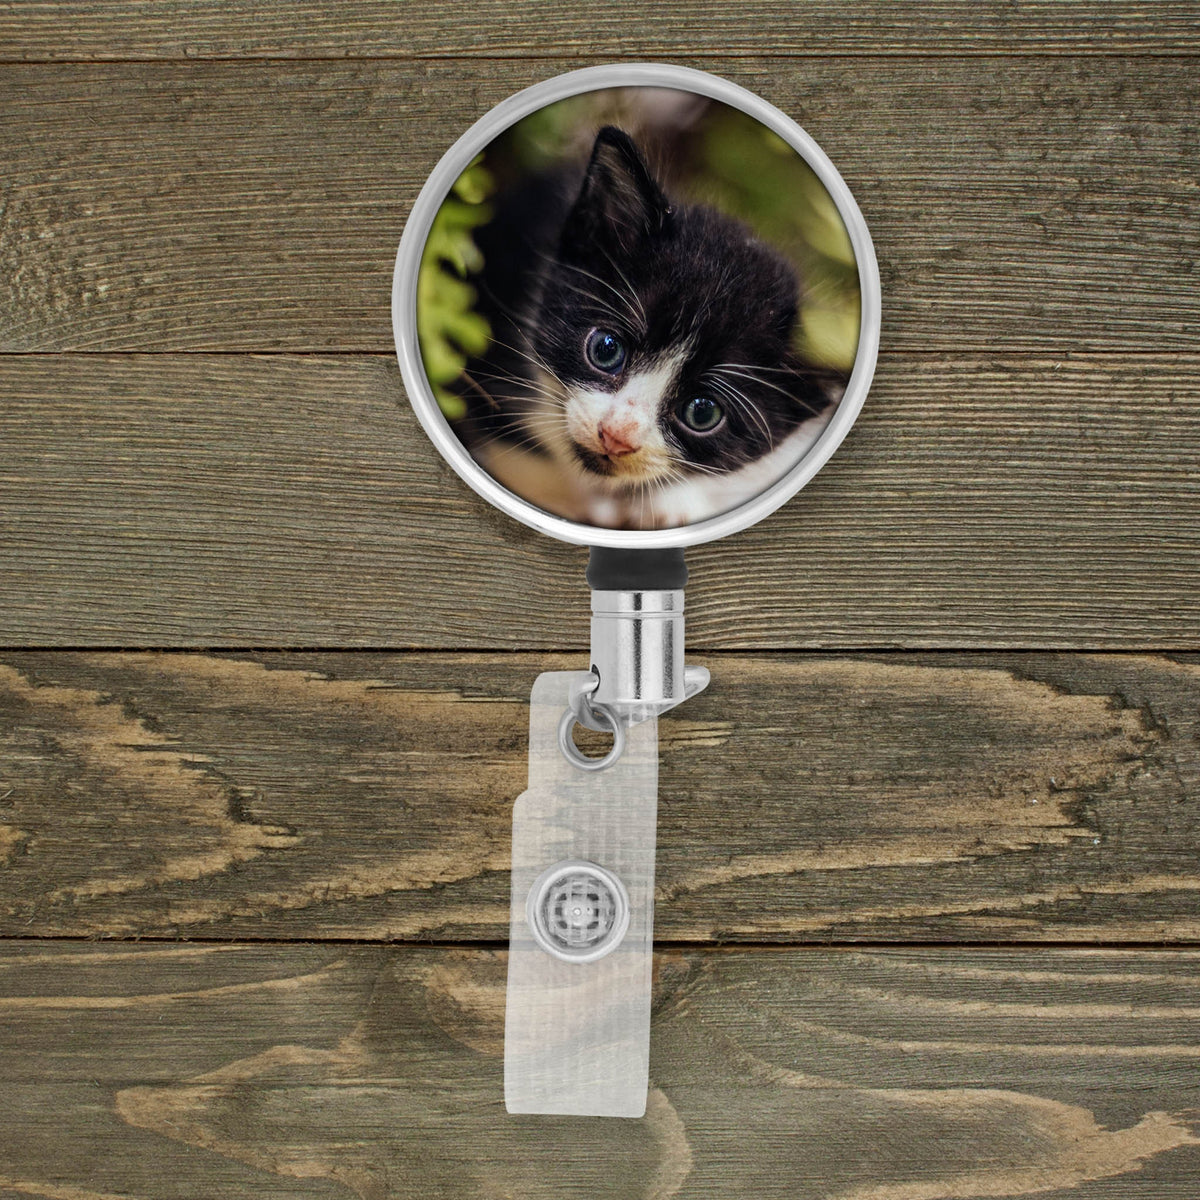 Customized Badge Reel | Personalized Office Accessories | Photo Badge Reel | Custom Photo Family